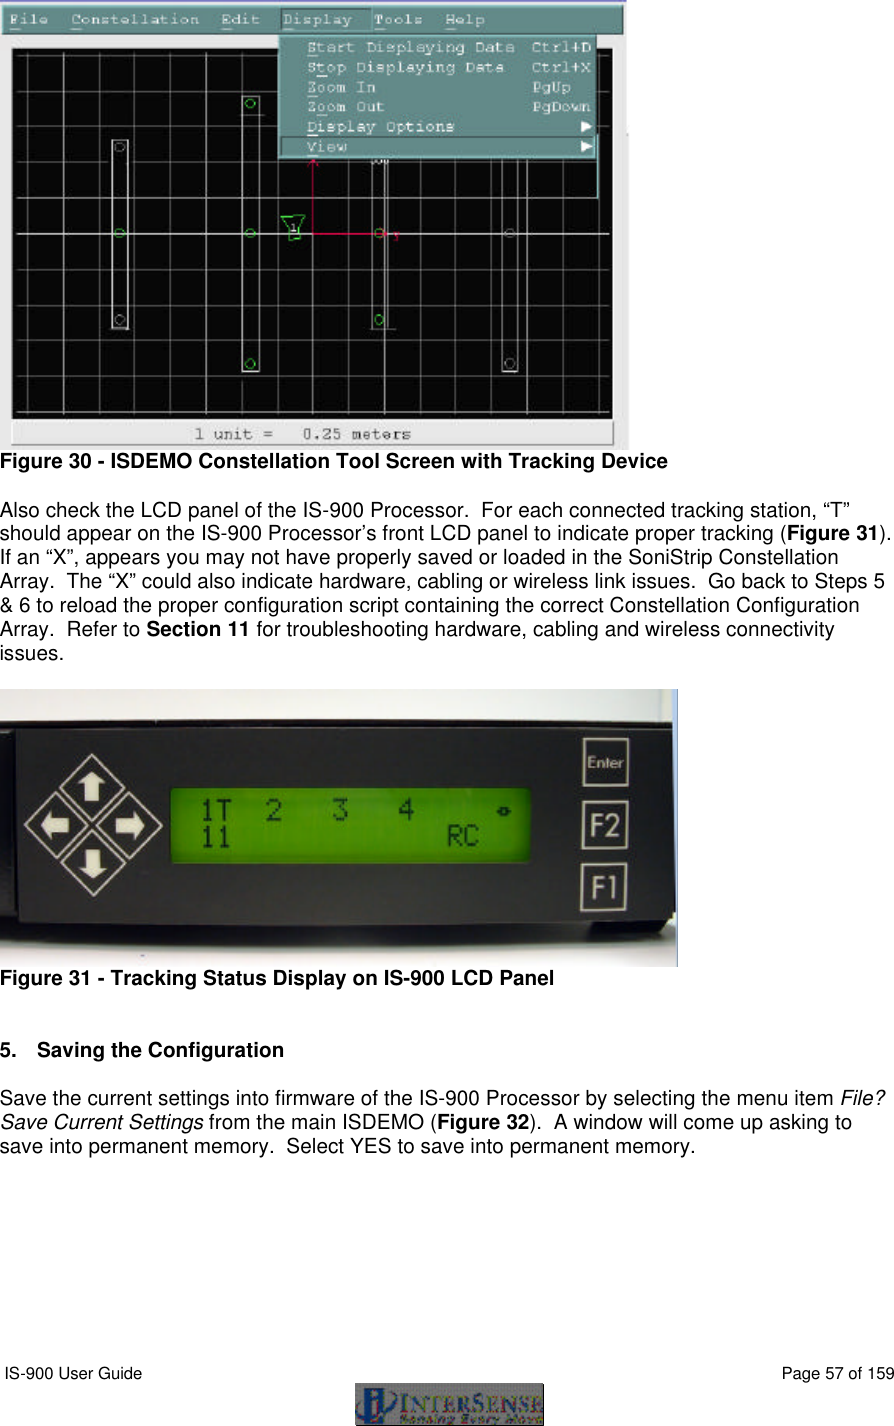  IS-900 User Guide                                                                                                                                          Page 57 of 159   Figure 30 - ISDEMO Constellation Tool Screen with Tracking Device  Also check the LCD panel of the IS-900 Processor.  For each connected tracking station, “T” should appear on the IS-900 Processor’s front LCD panel to indicate proper tracking (Figure 31).  If an “X”, appears you may not have properly saved or loaded in the SoniStrip Constellation Array.  The “X” could also indicate hardware, cabling or wireless link issues.  Go back to Steps 5 &amp; 6 to reload the proper configuration script containing the correct Constellation Configuration Array.  Refer to Section 11 for troubleshooting hardware, cabling and wireless connectivity issues.   Figure 31 - Tracking Status Display on IS-900 LCD Panel   5. Saving the Configuration  Save the current settings into firmware of the IS-900 Processor by selecting the menu item File? Save Current Settings from the main ISDEMO (Figure 32).  A window will come up asking to save into permanent memory.  Select YES to save into permanent memory.  